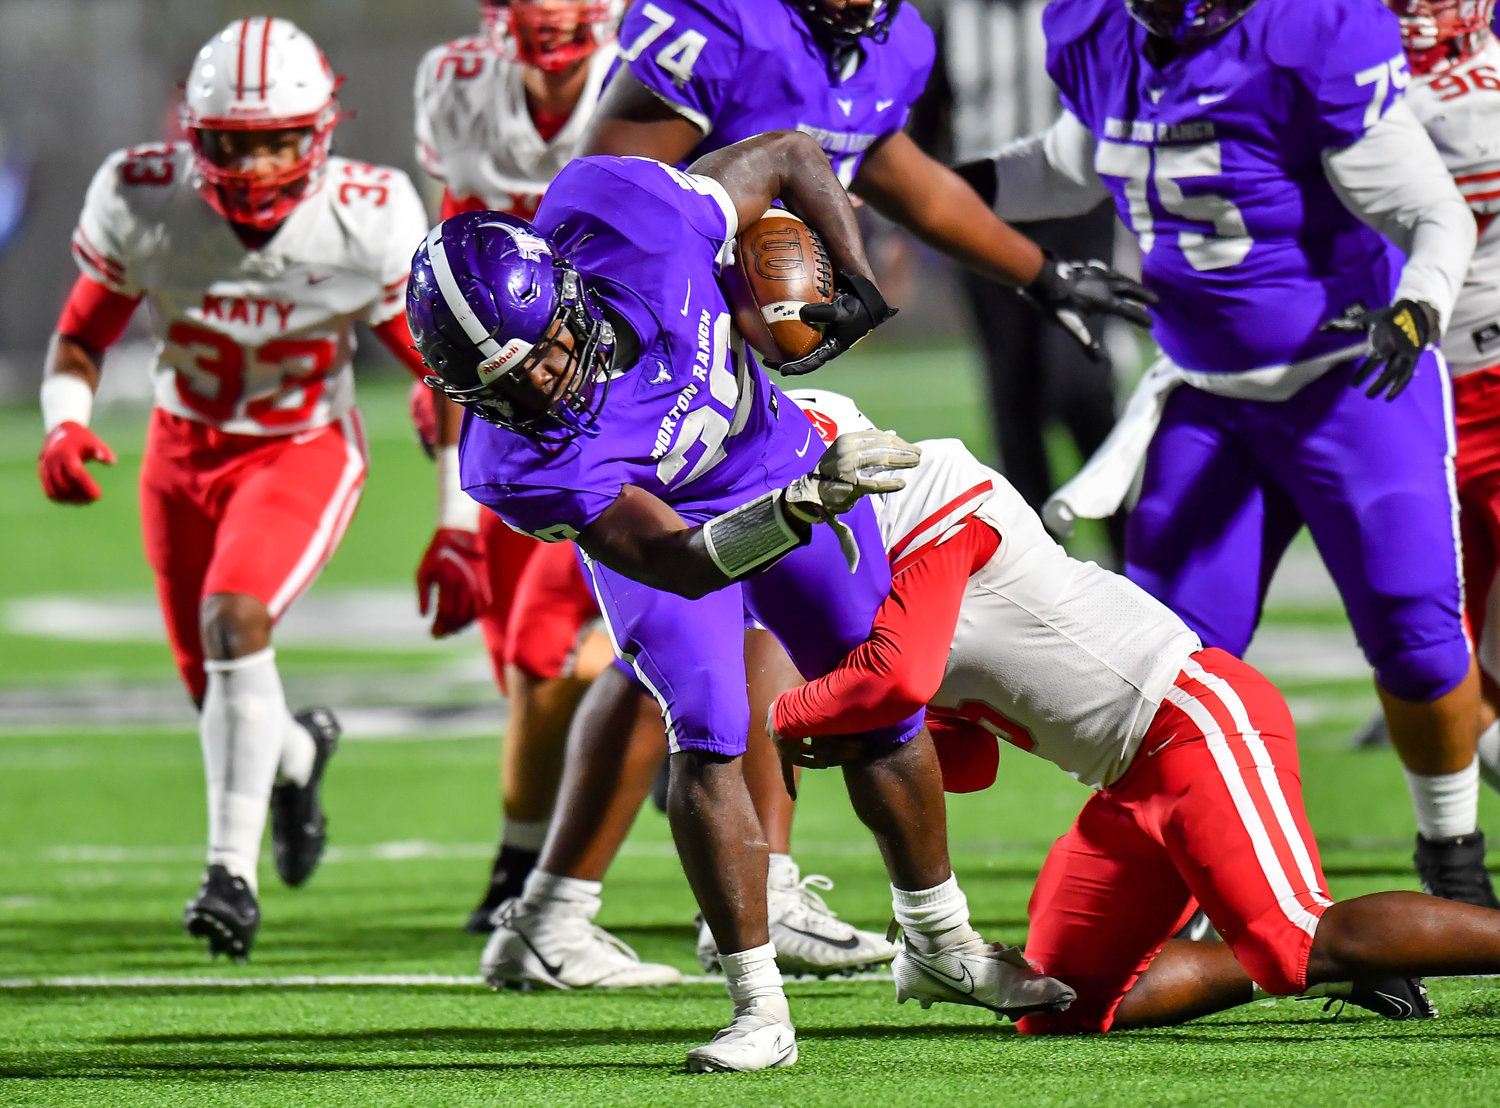 Katy, Tx. Nov 5, 2021: Morton Ranch's Ryan Hall #28 carries the ball during a conference game between Katy and Morton Ranch at Legacy Stadium in Katy. (Photo by Mark Goodman / Katy Times)